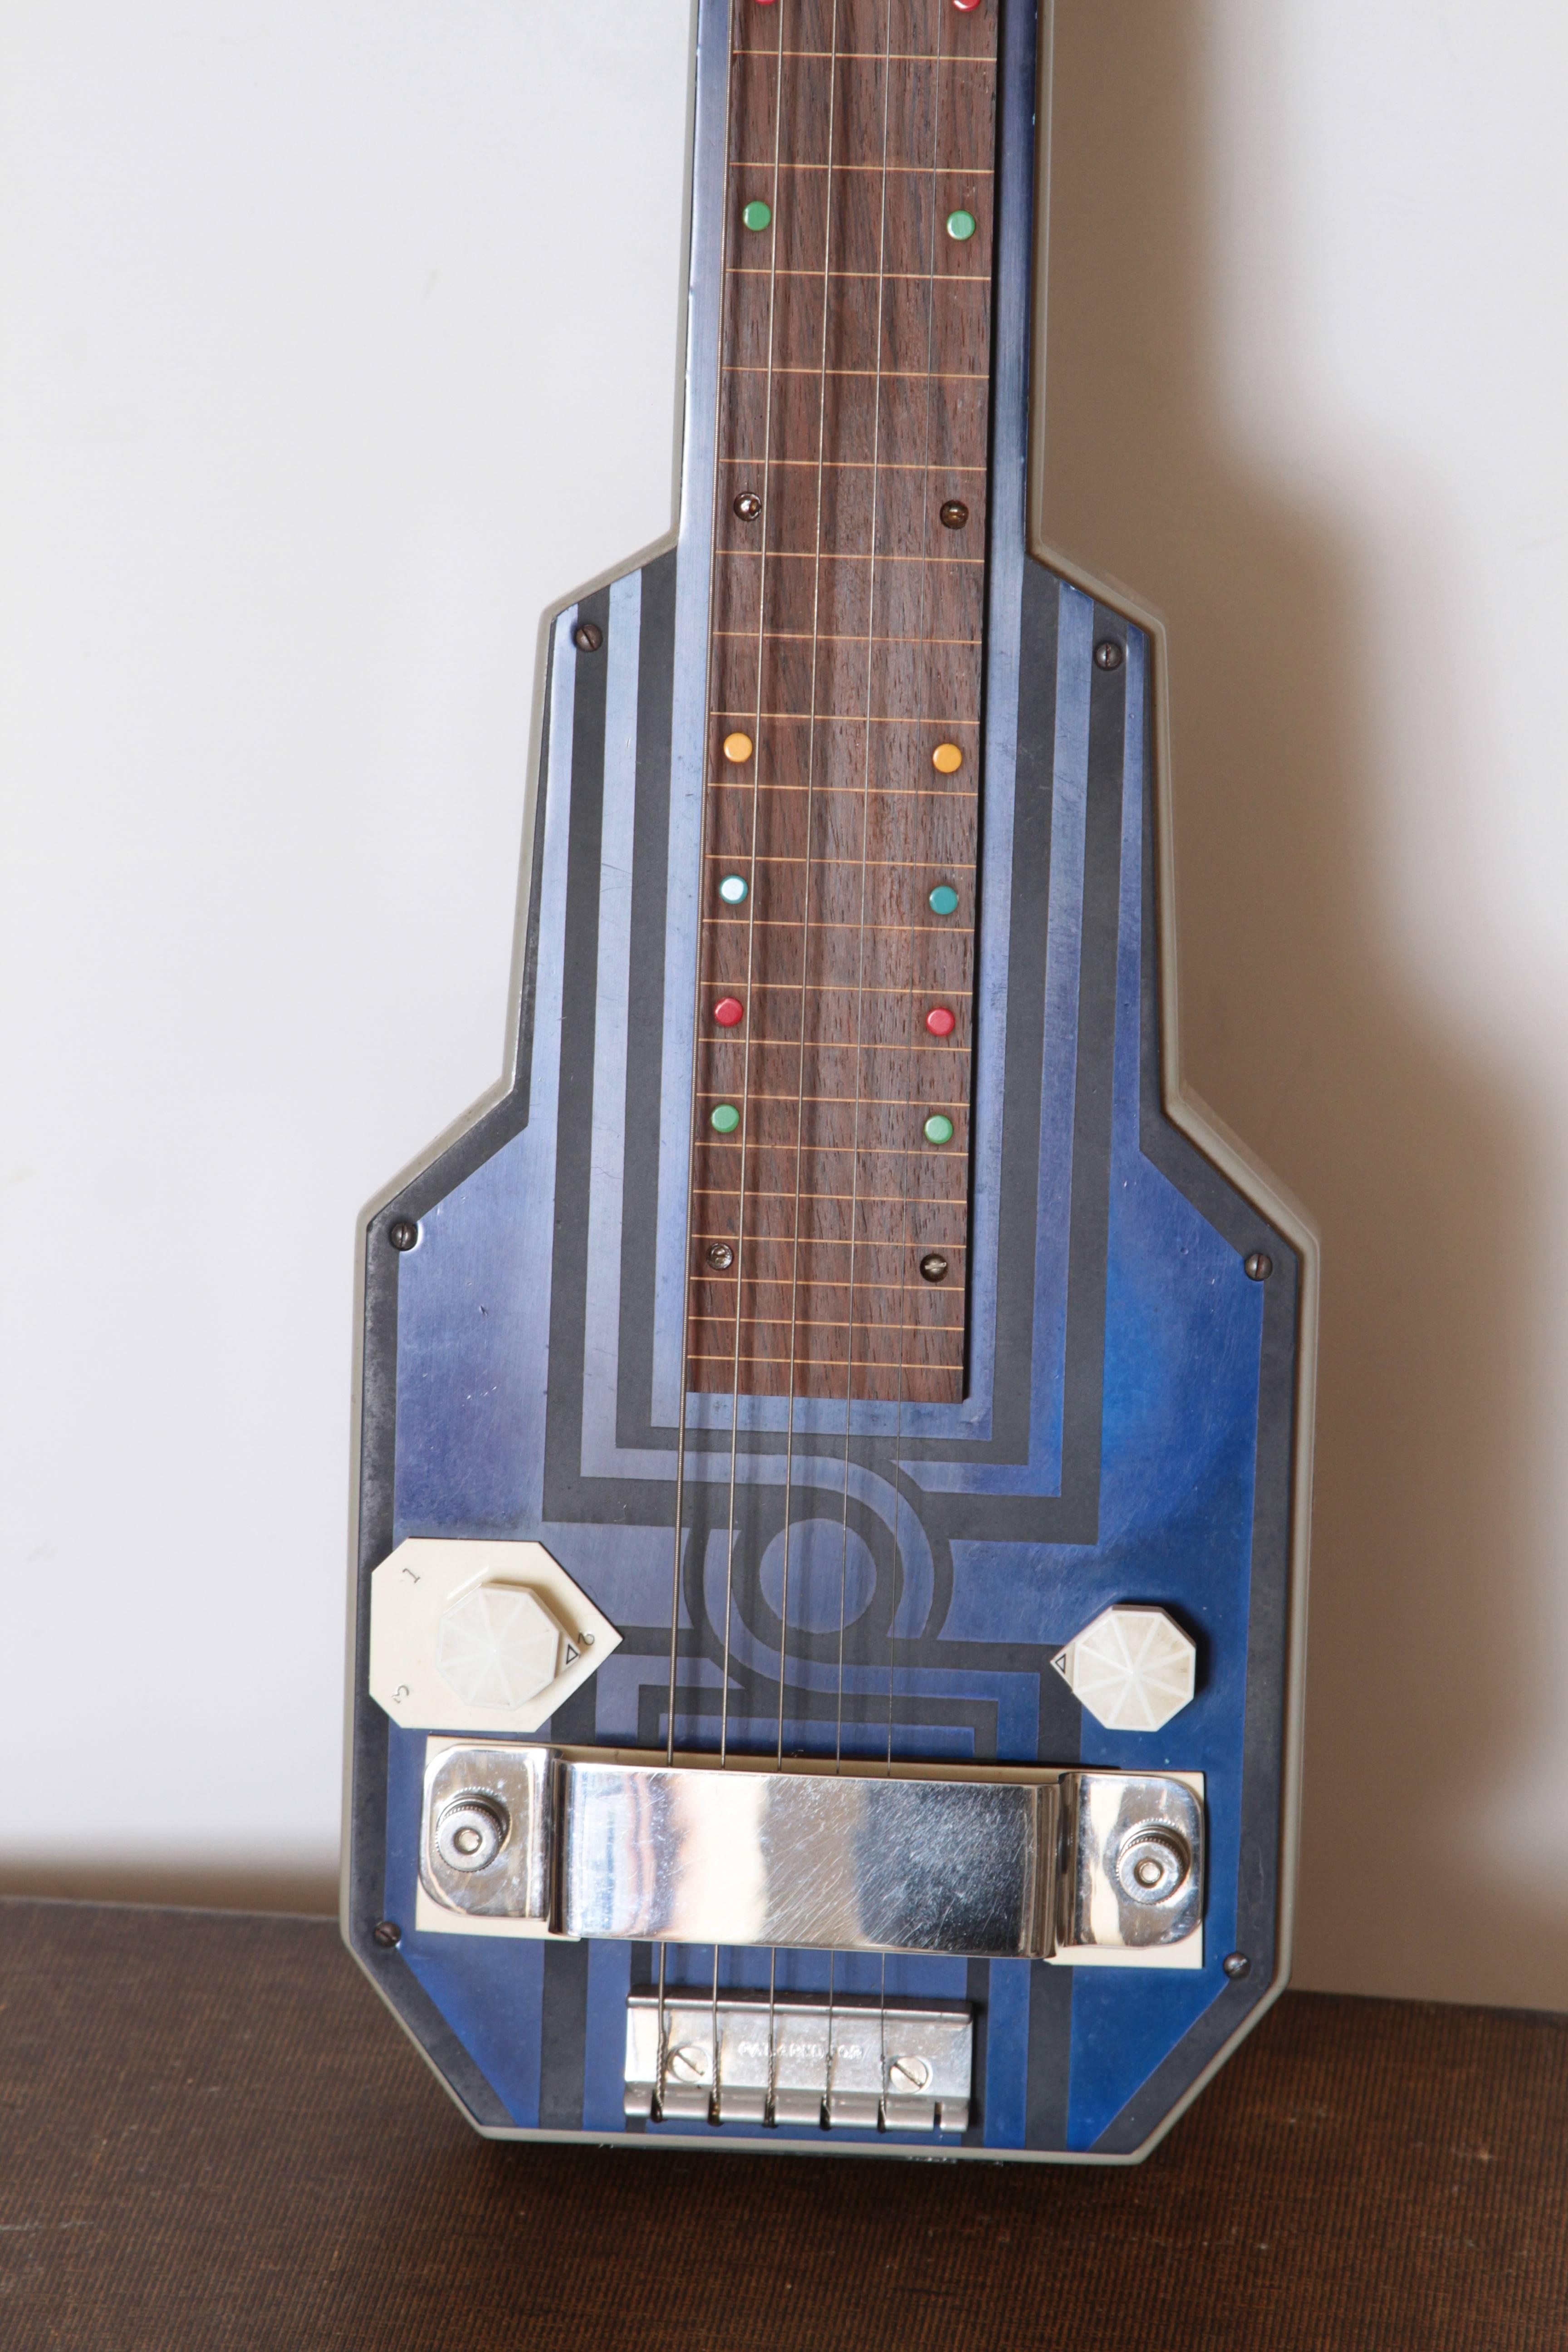 Art Deco Machine Age Epiphone Electar lap steel guitar, patented design, 1937

Original Epi Stathopoulos patented design, in etched cobalt catalin (bakelite) laminate.

Model M, Hawaiian, stamped 2488 into the headstock, which appears to date it